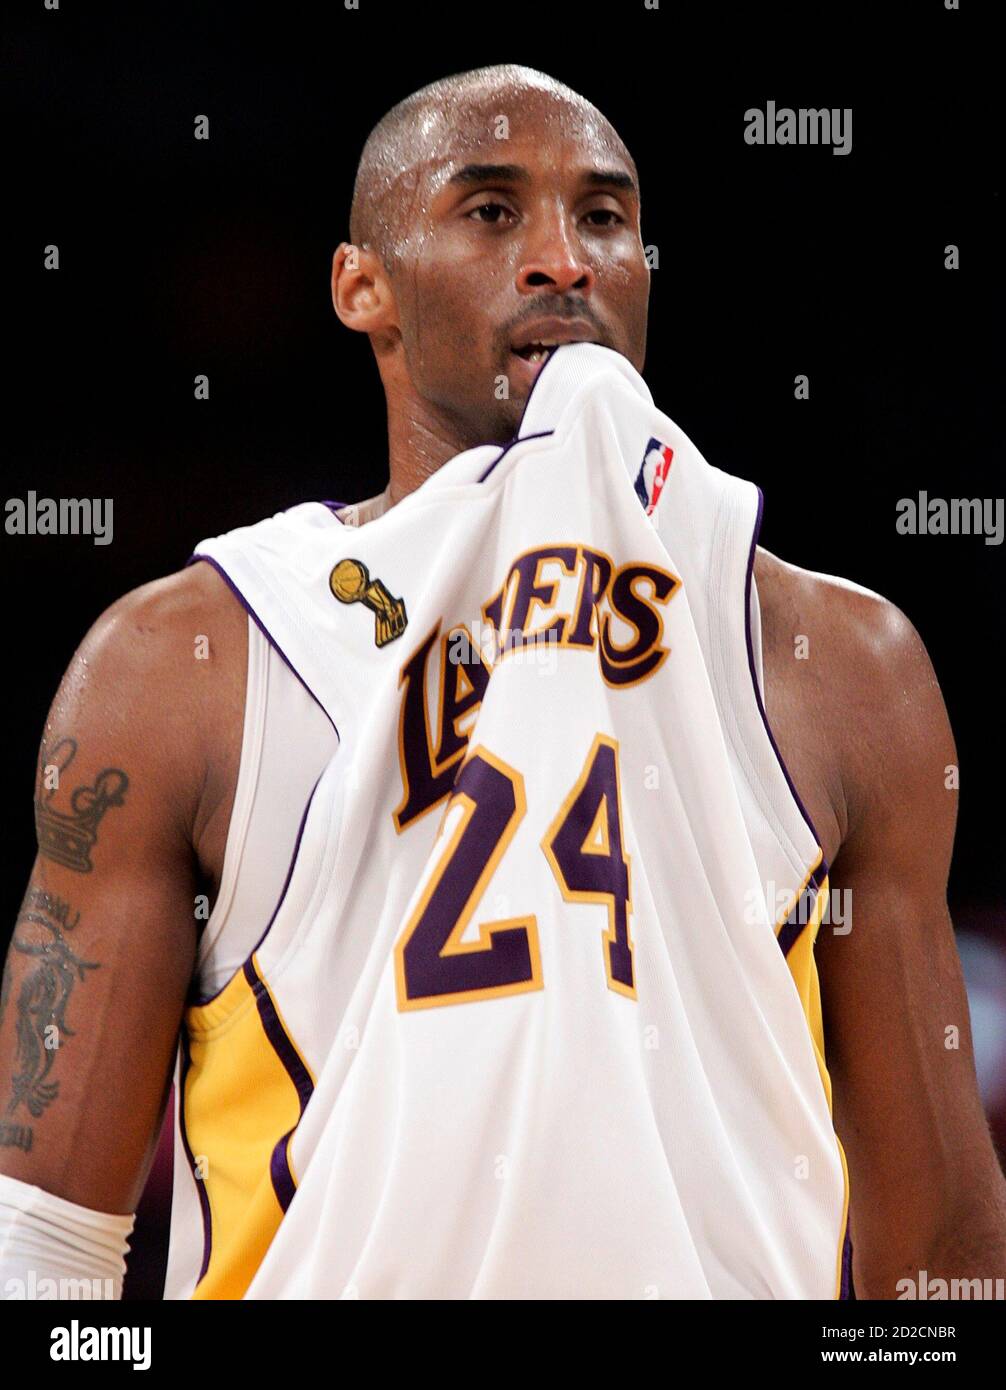 kobe bryant jersey in mouth